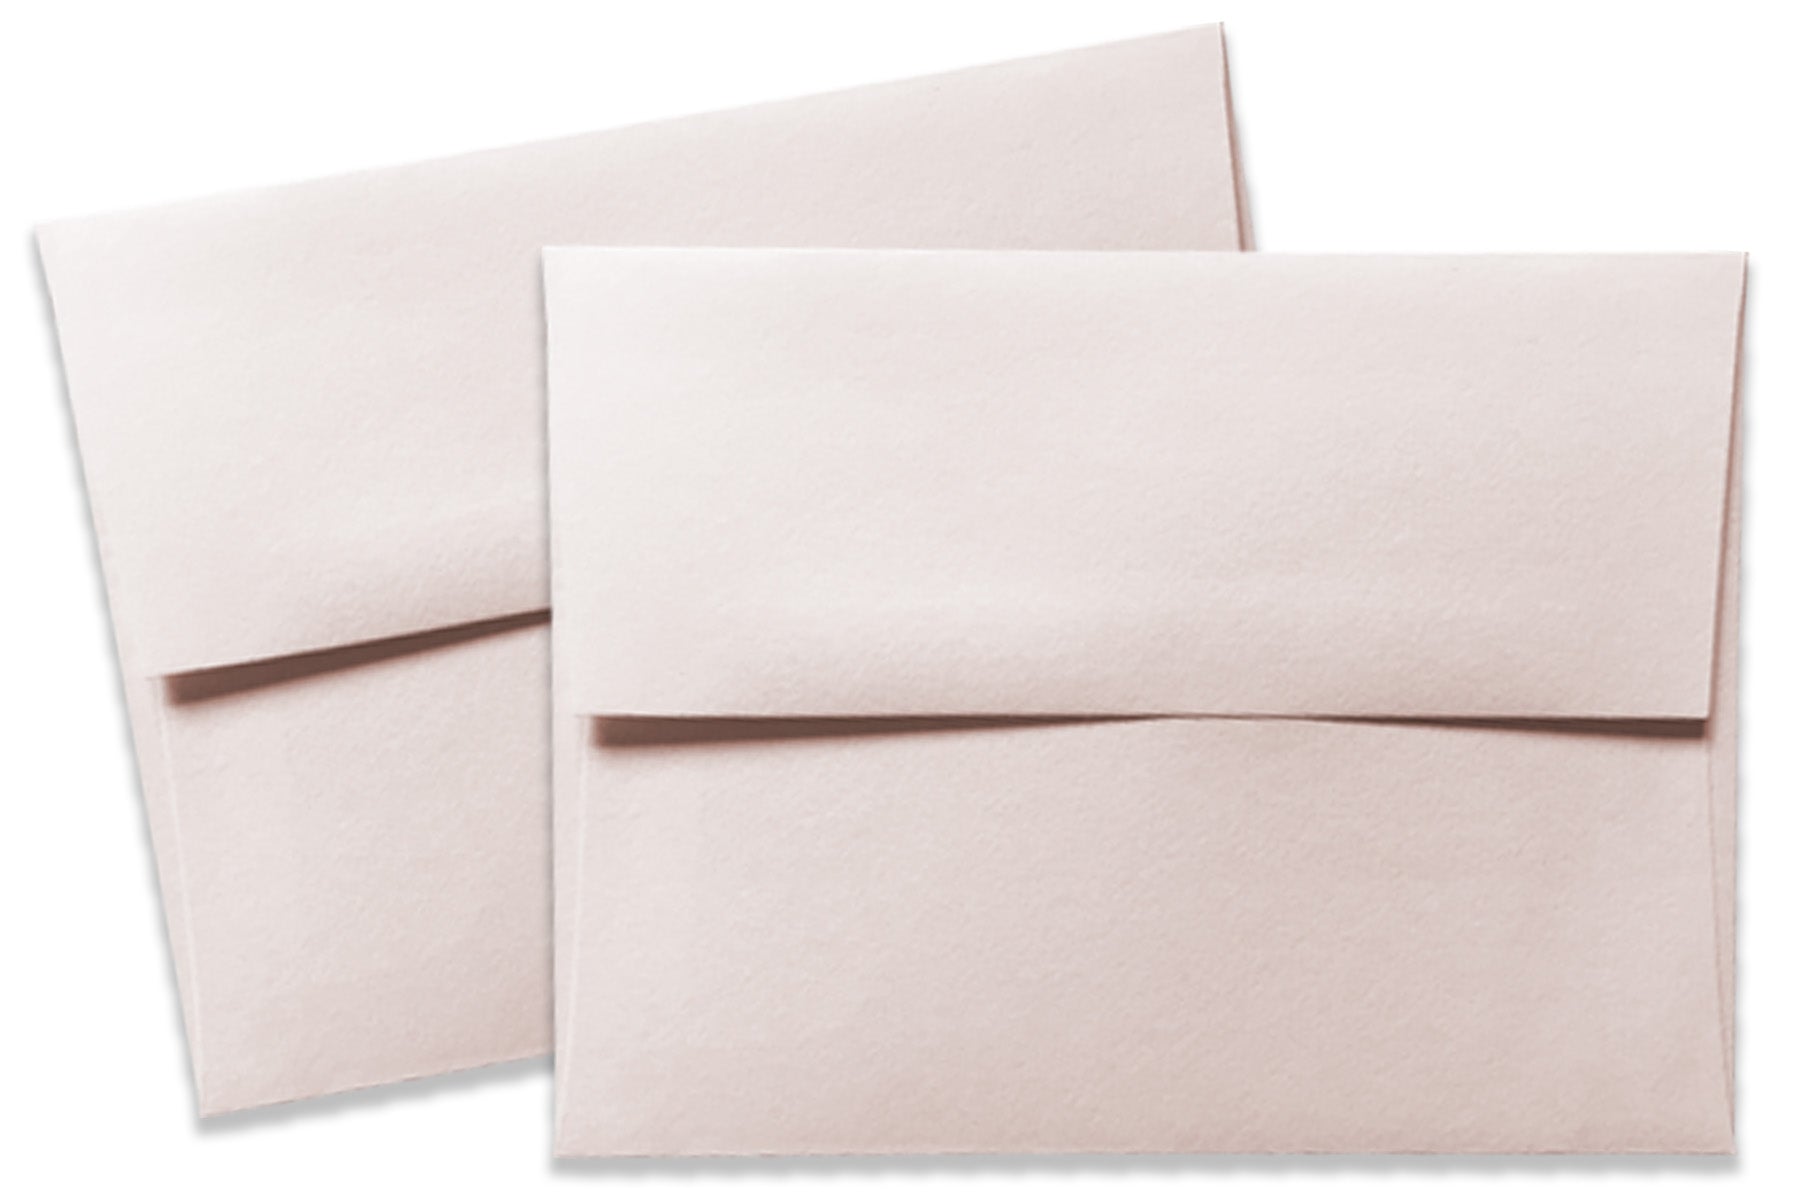 Basic Blush Pink A1 RSVP and Note Card Envelopes